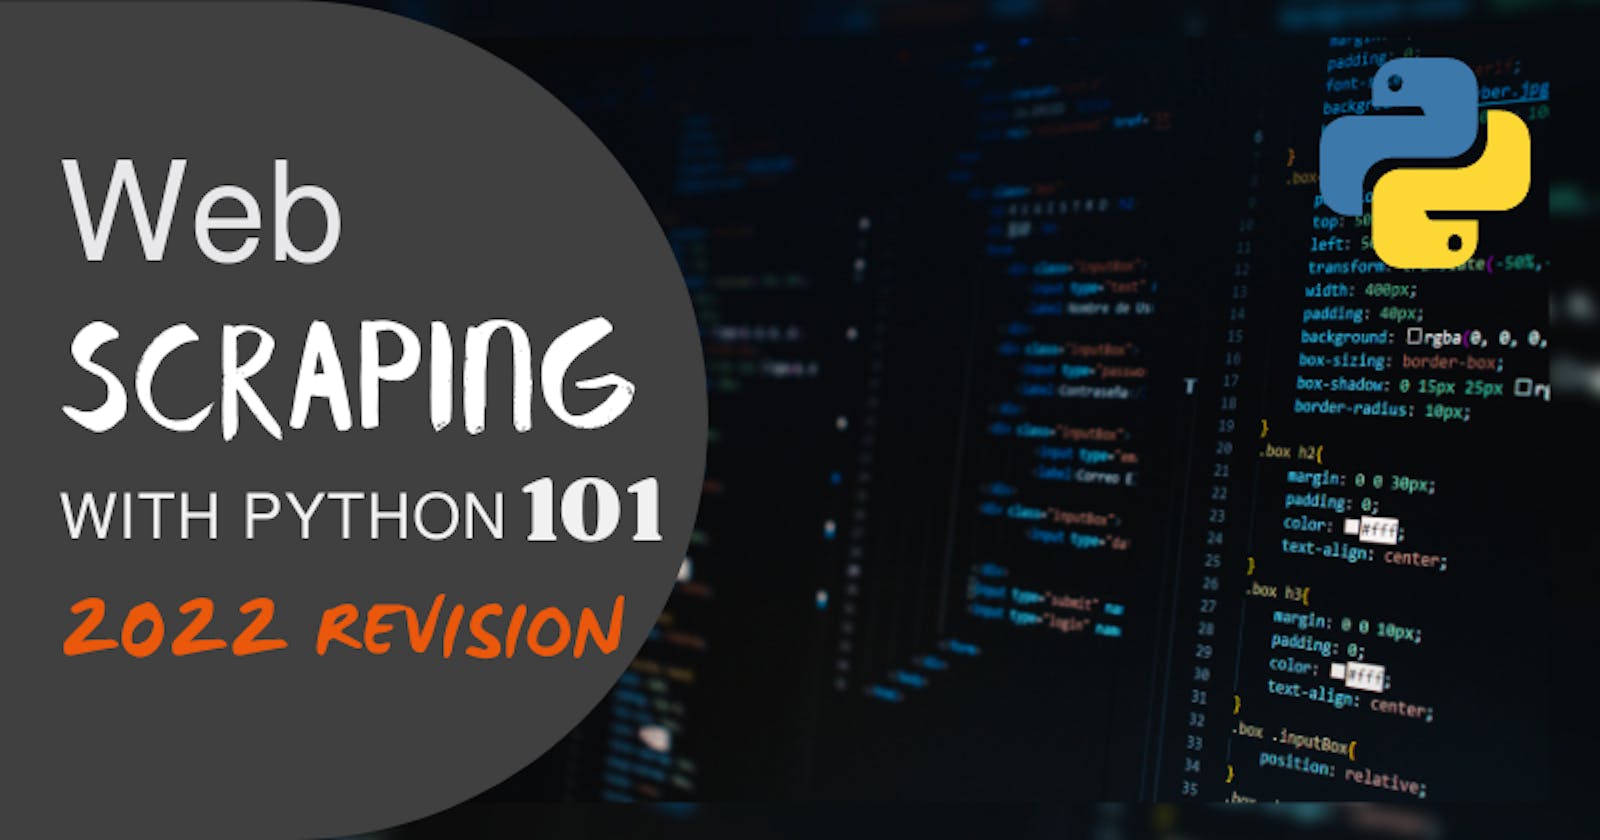 Web Scraping with Python 101